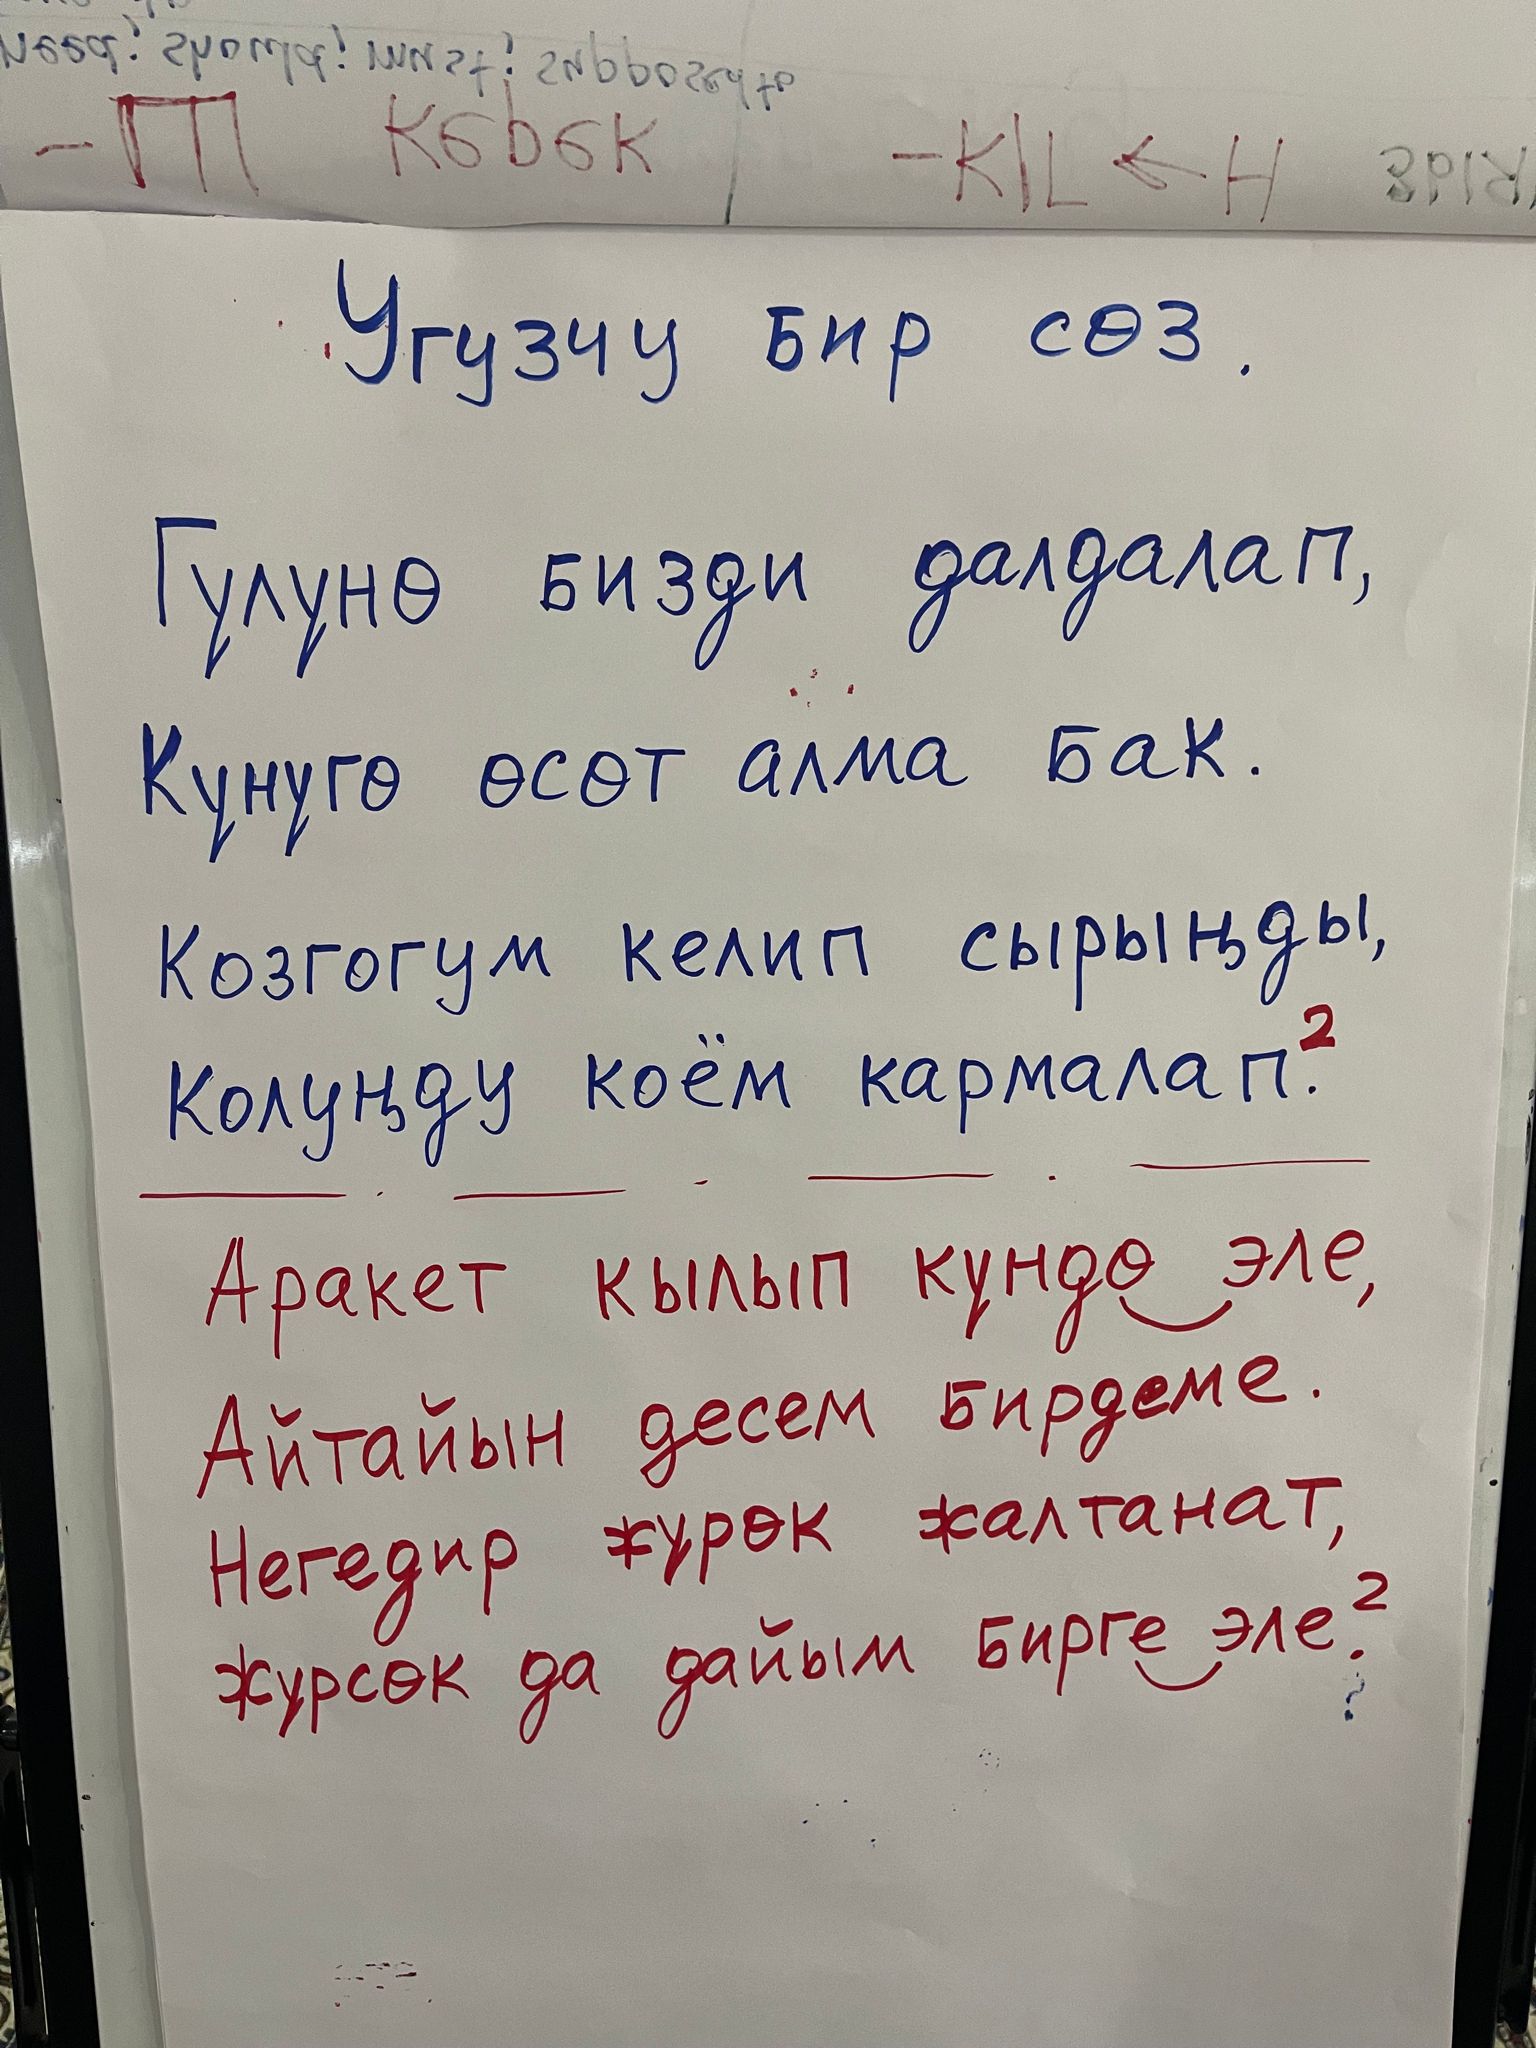 song title and lyrics in Kyrgyz on an easel paper pad